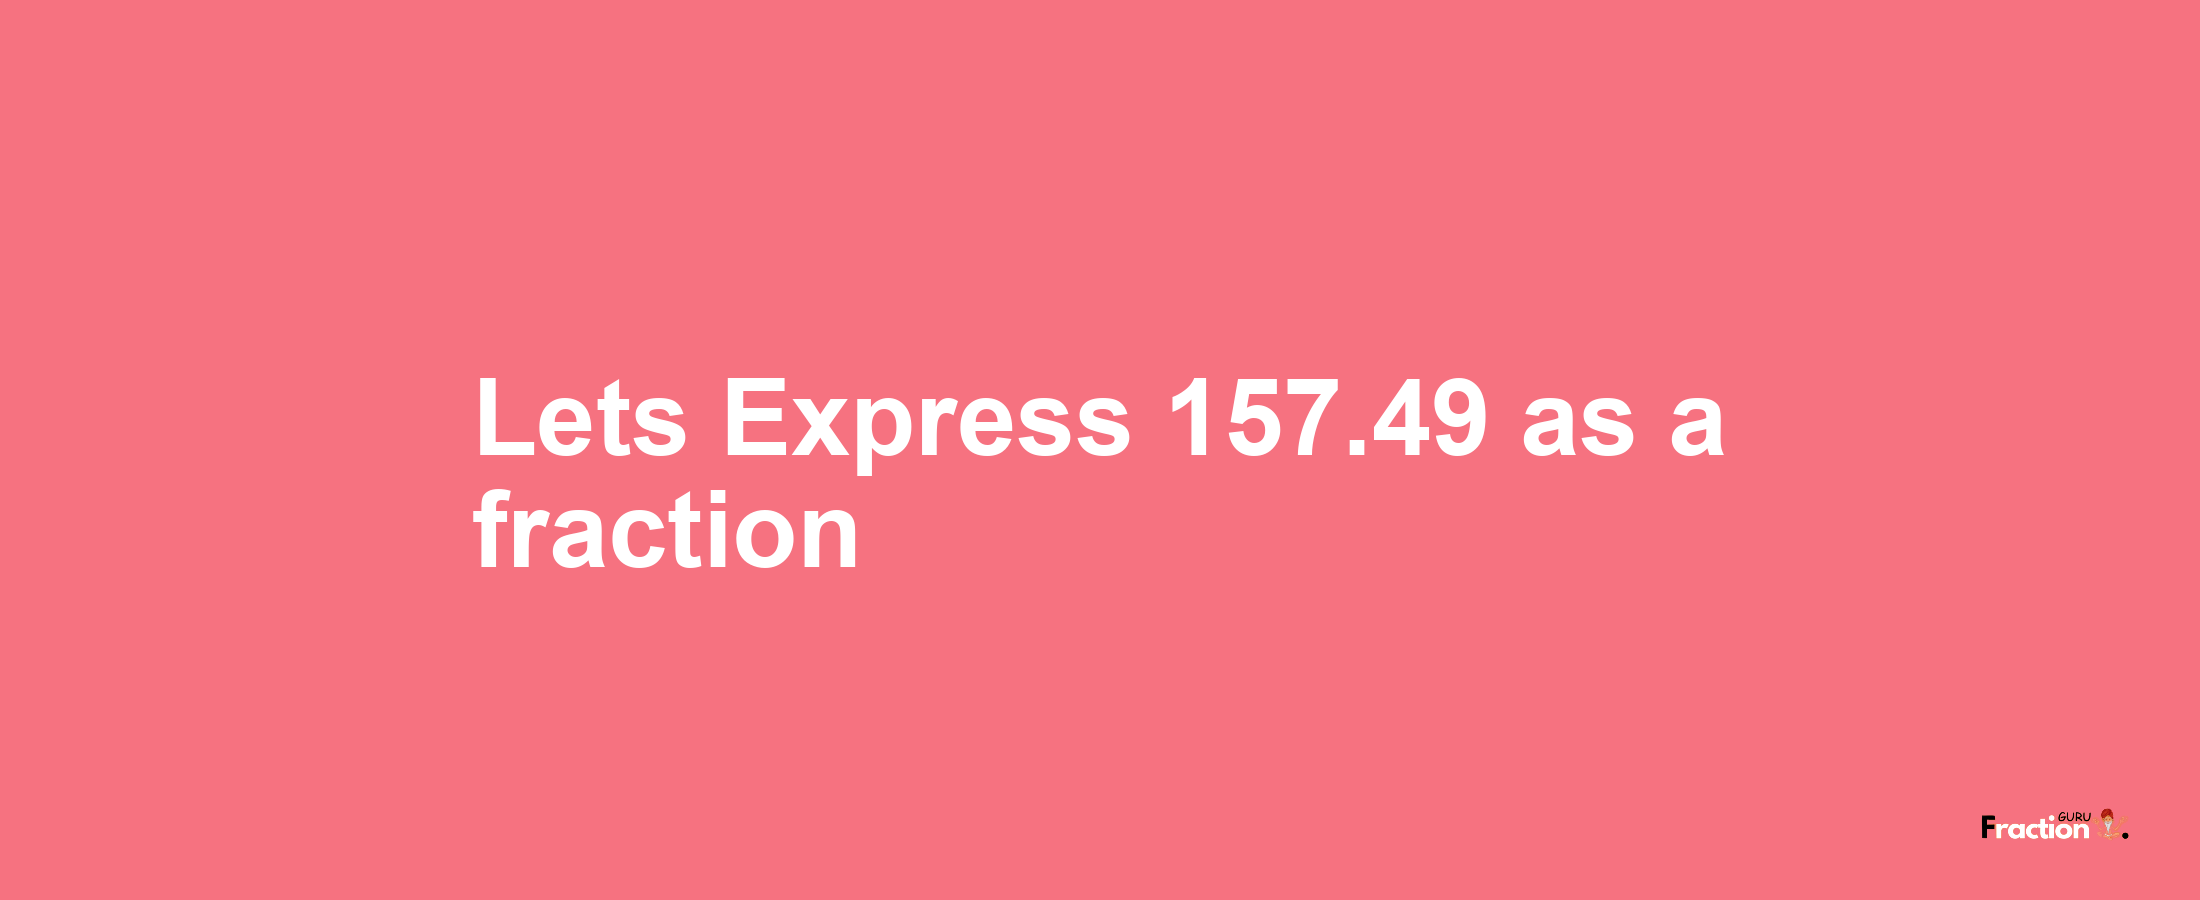 Lets Express 157.49 as afraction